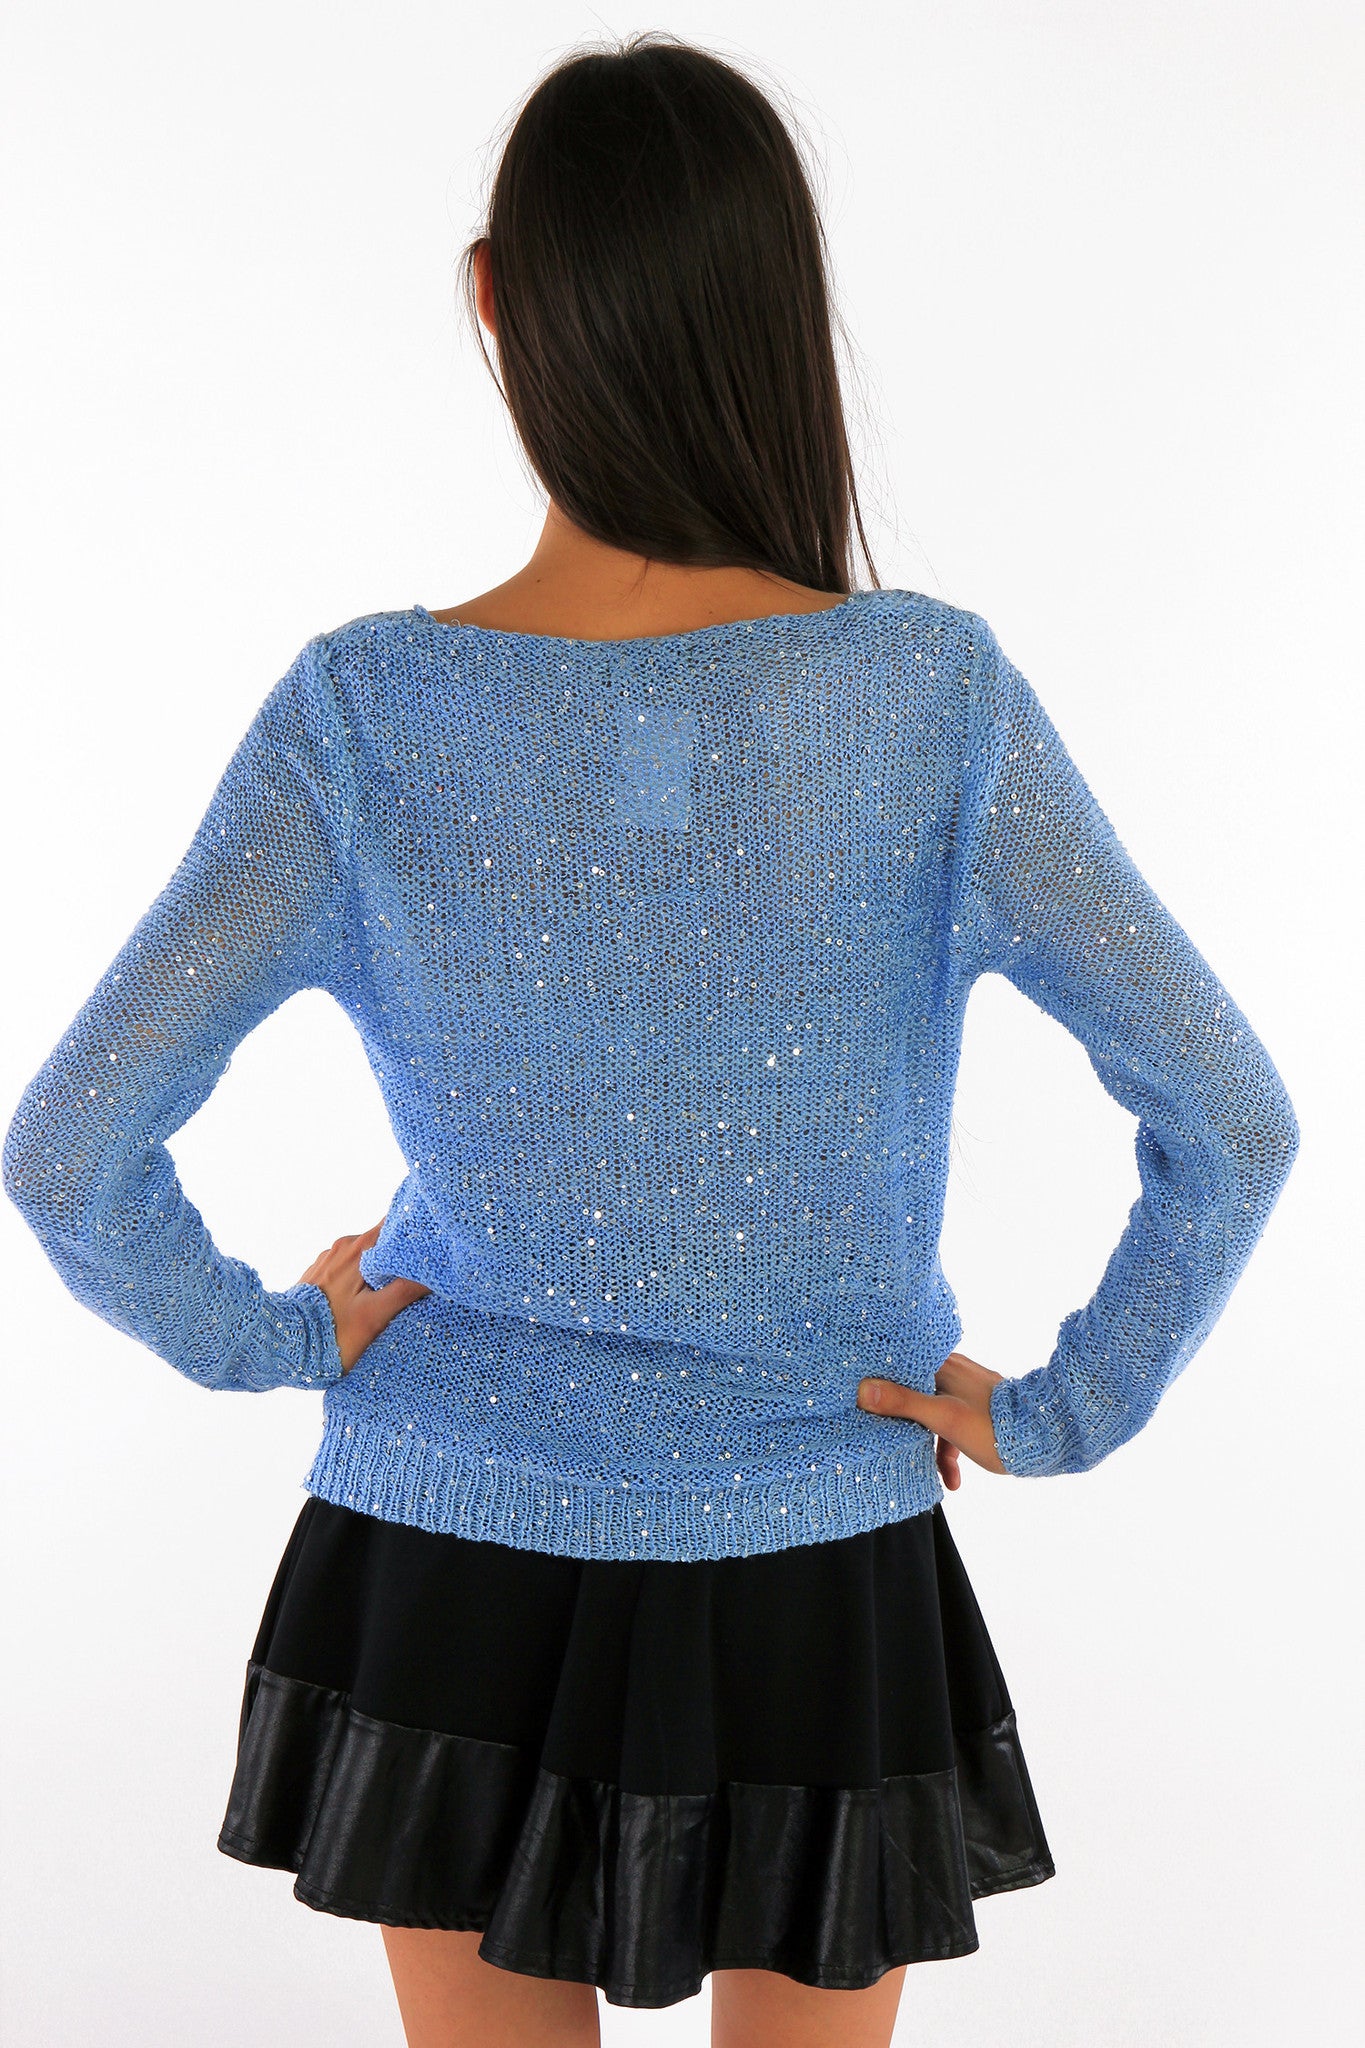 Sequin Style Jumper